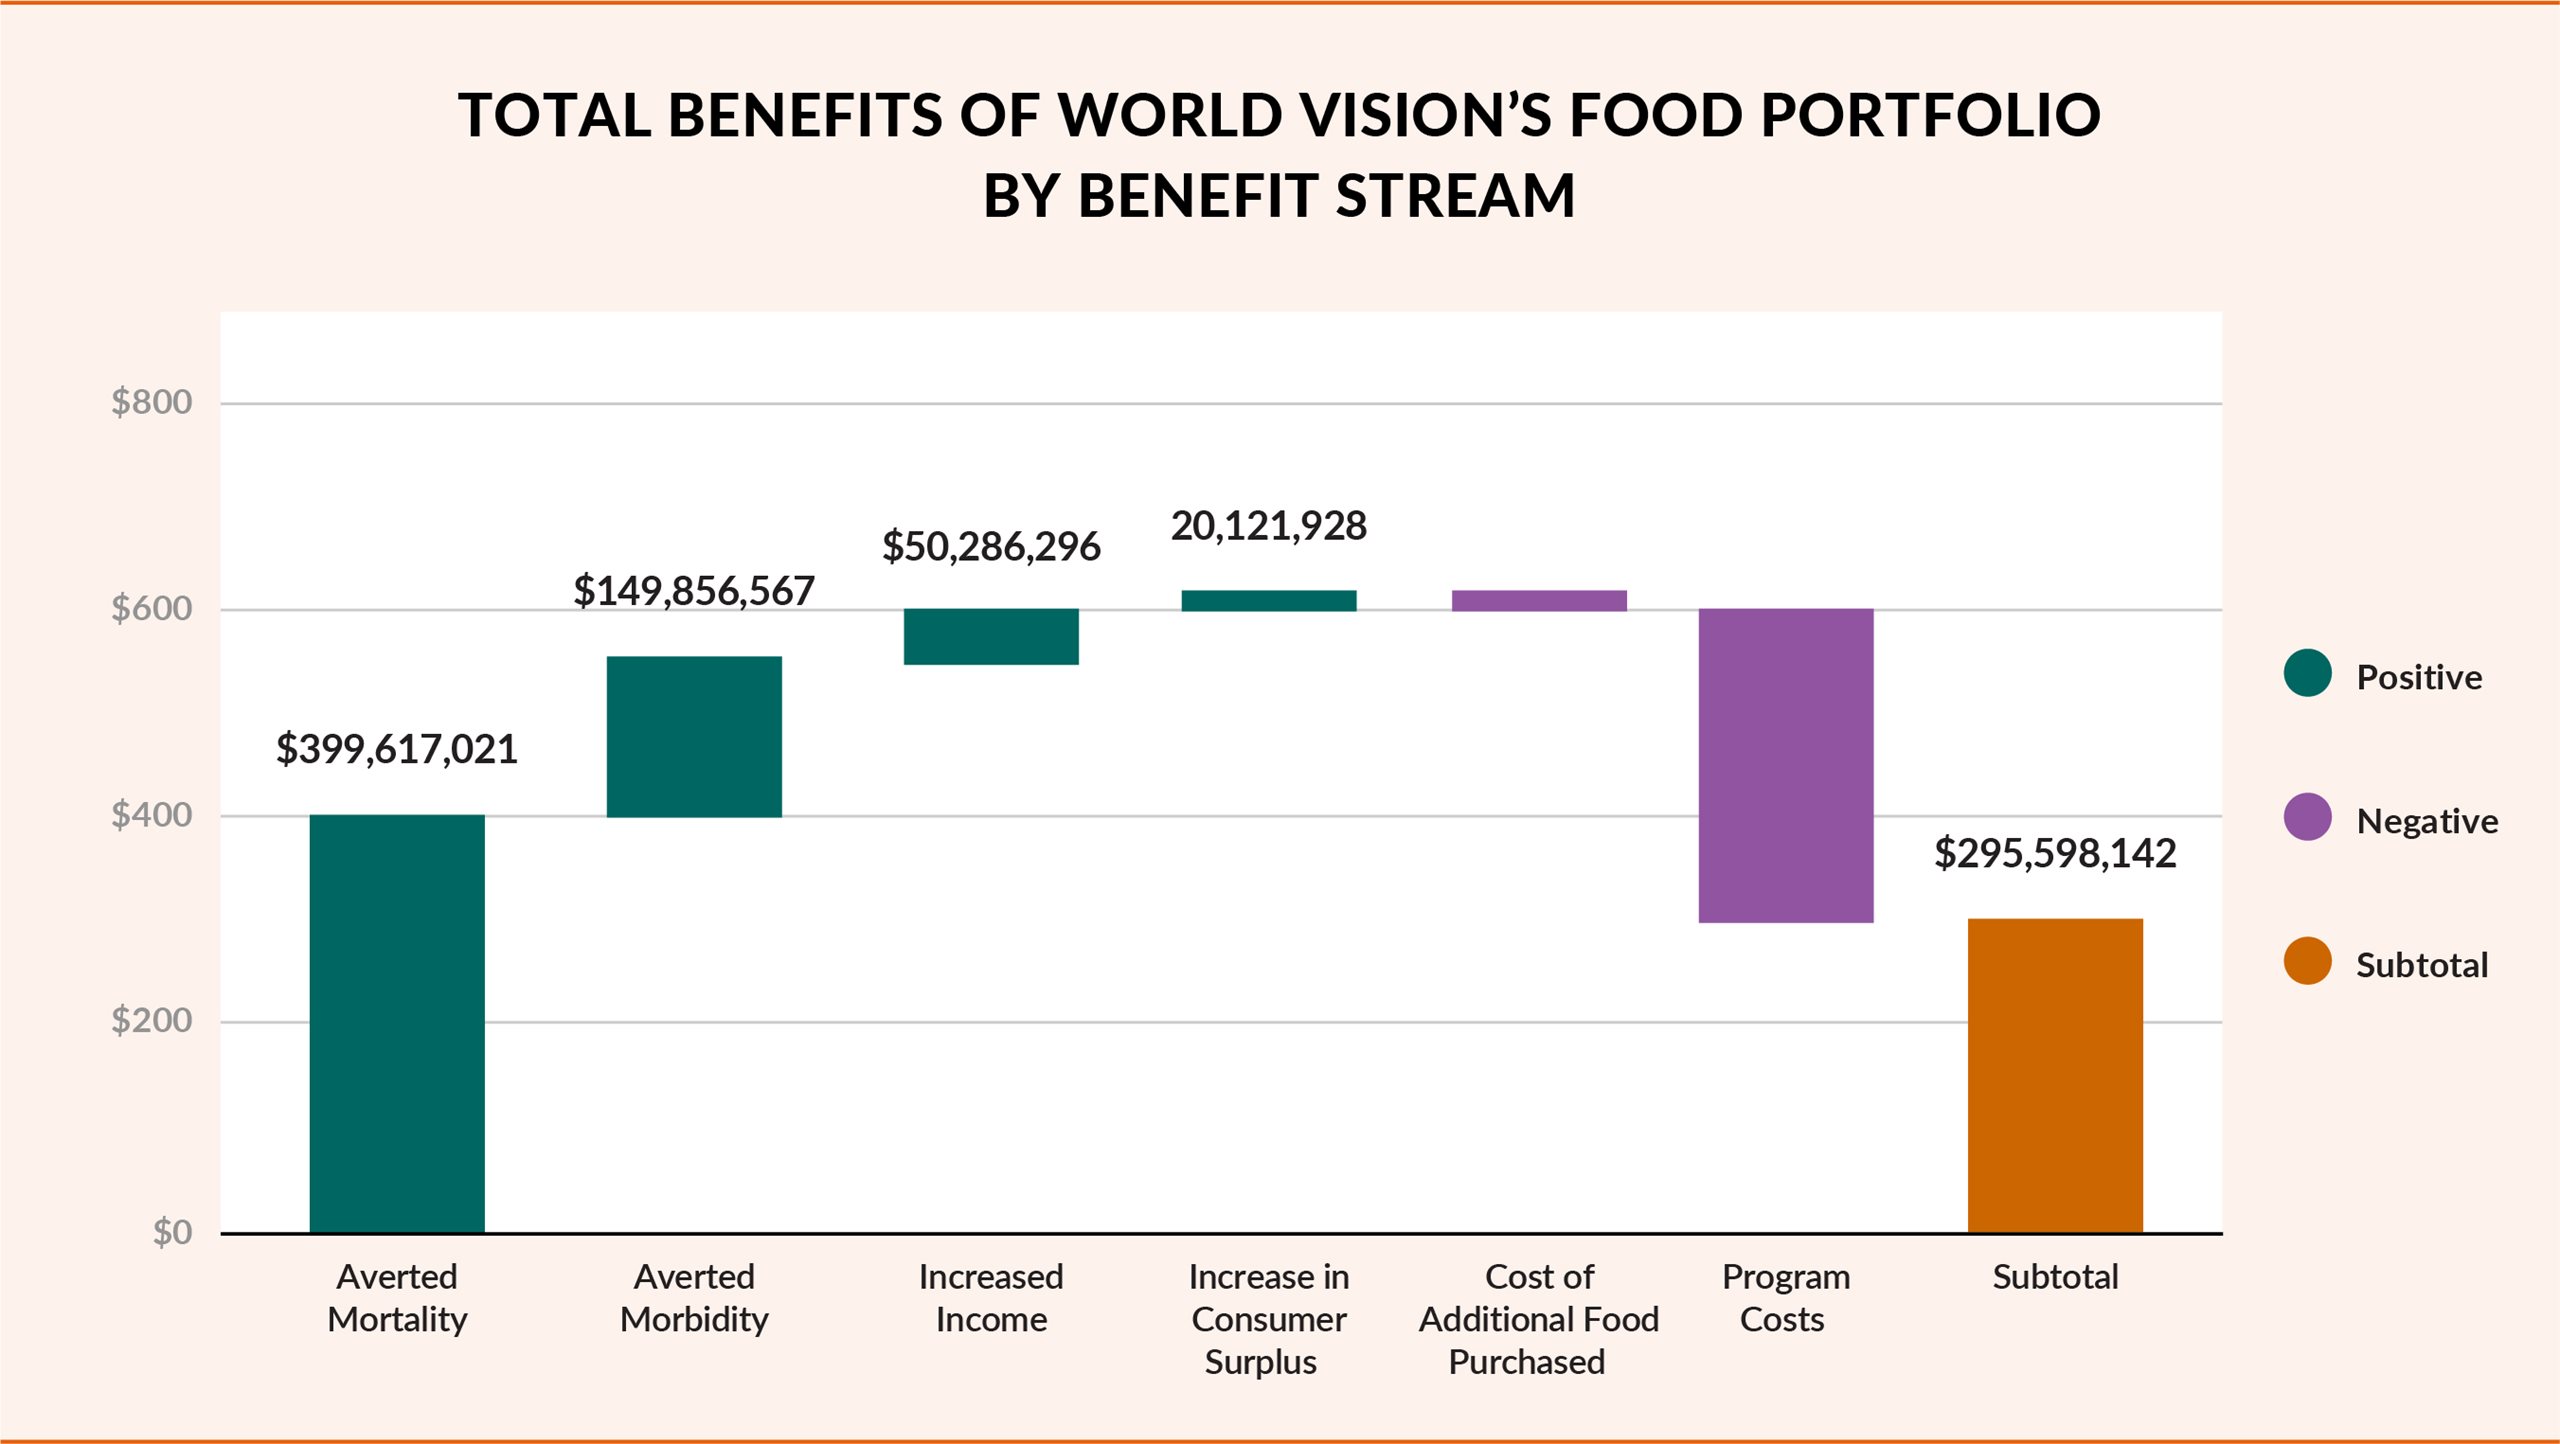 Graph shows the total benefits of World Vision’s food portfolio by benefit stream.